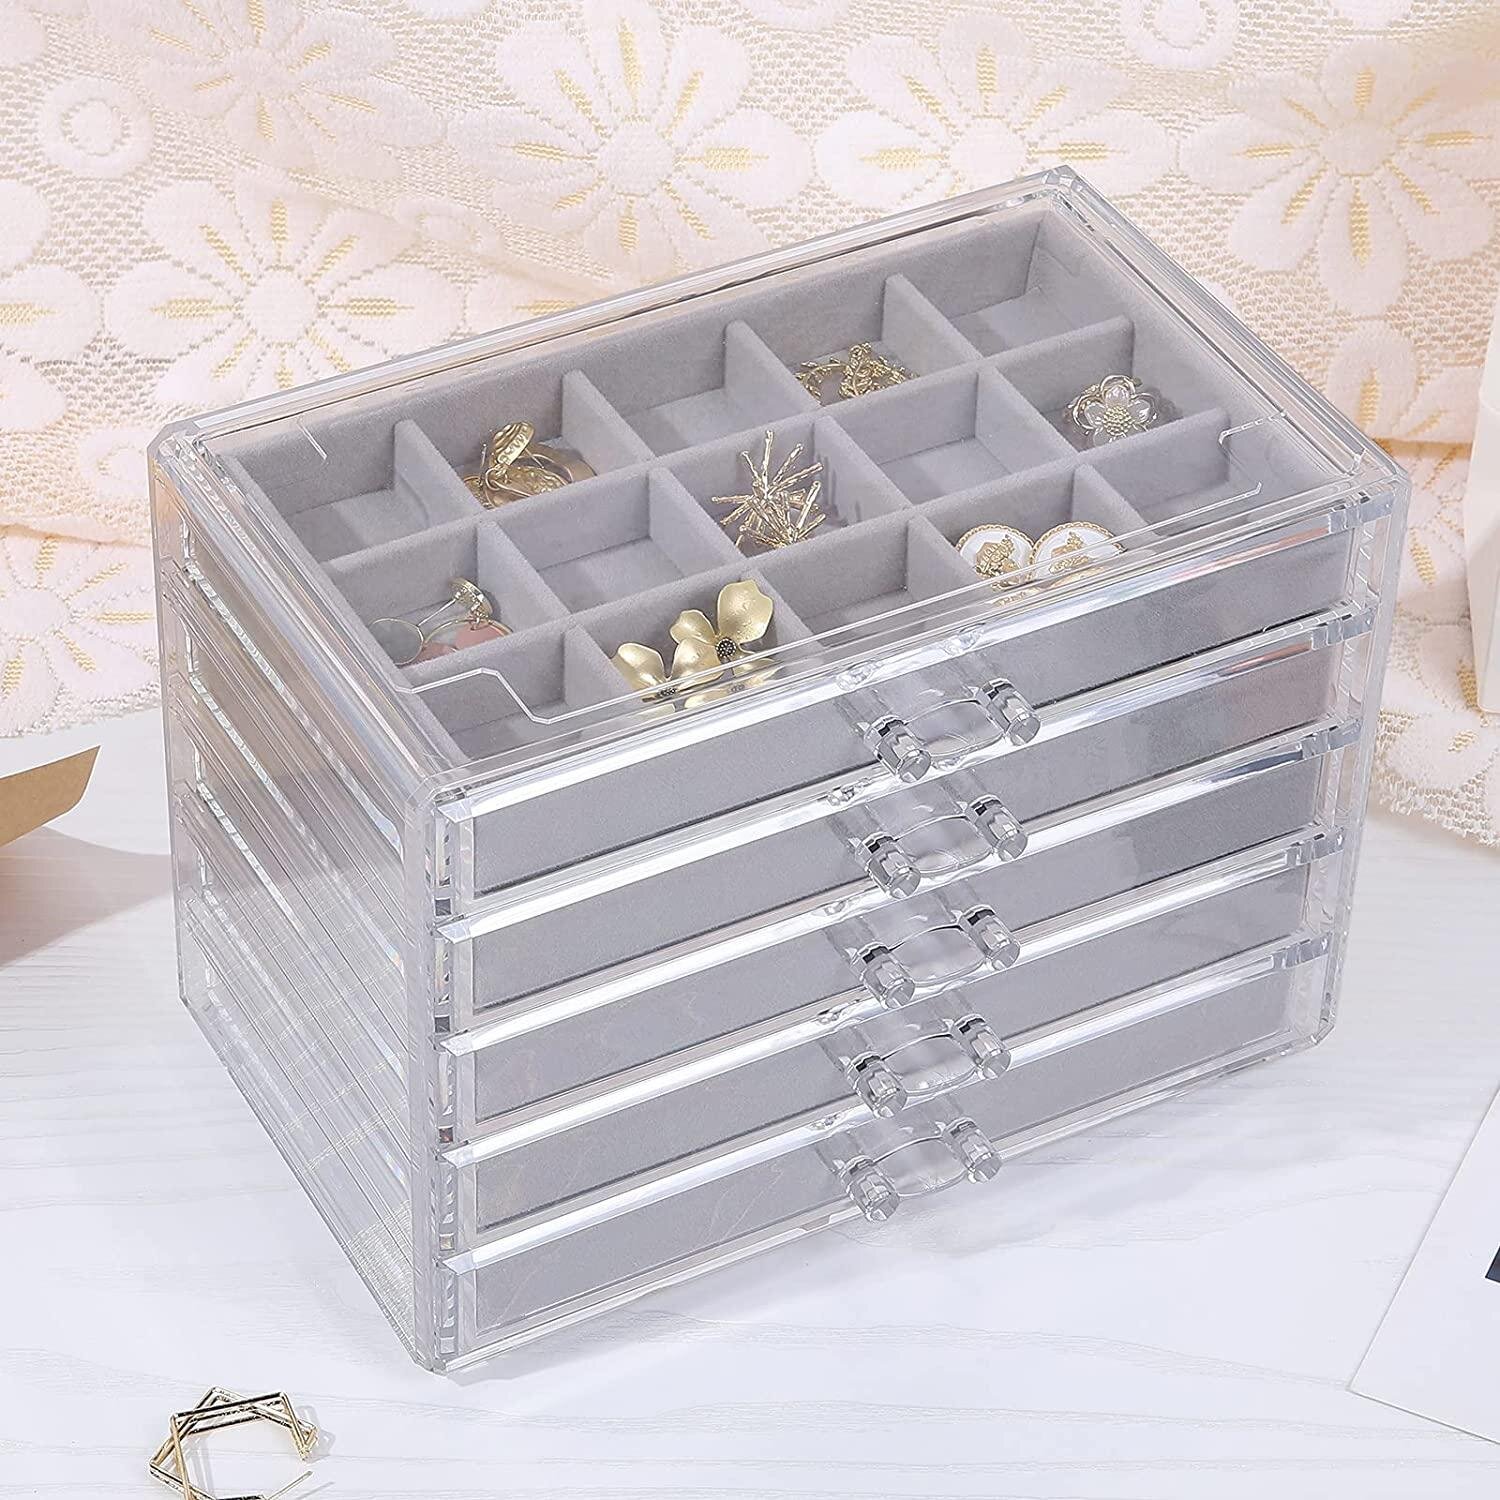 Velvet Rings Earrings Necklace Jewelry Box Studs Display Stand Holder Organizer 